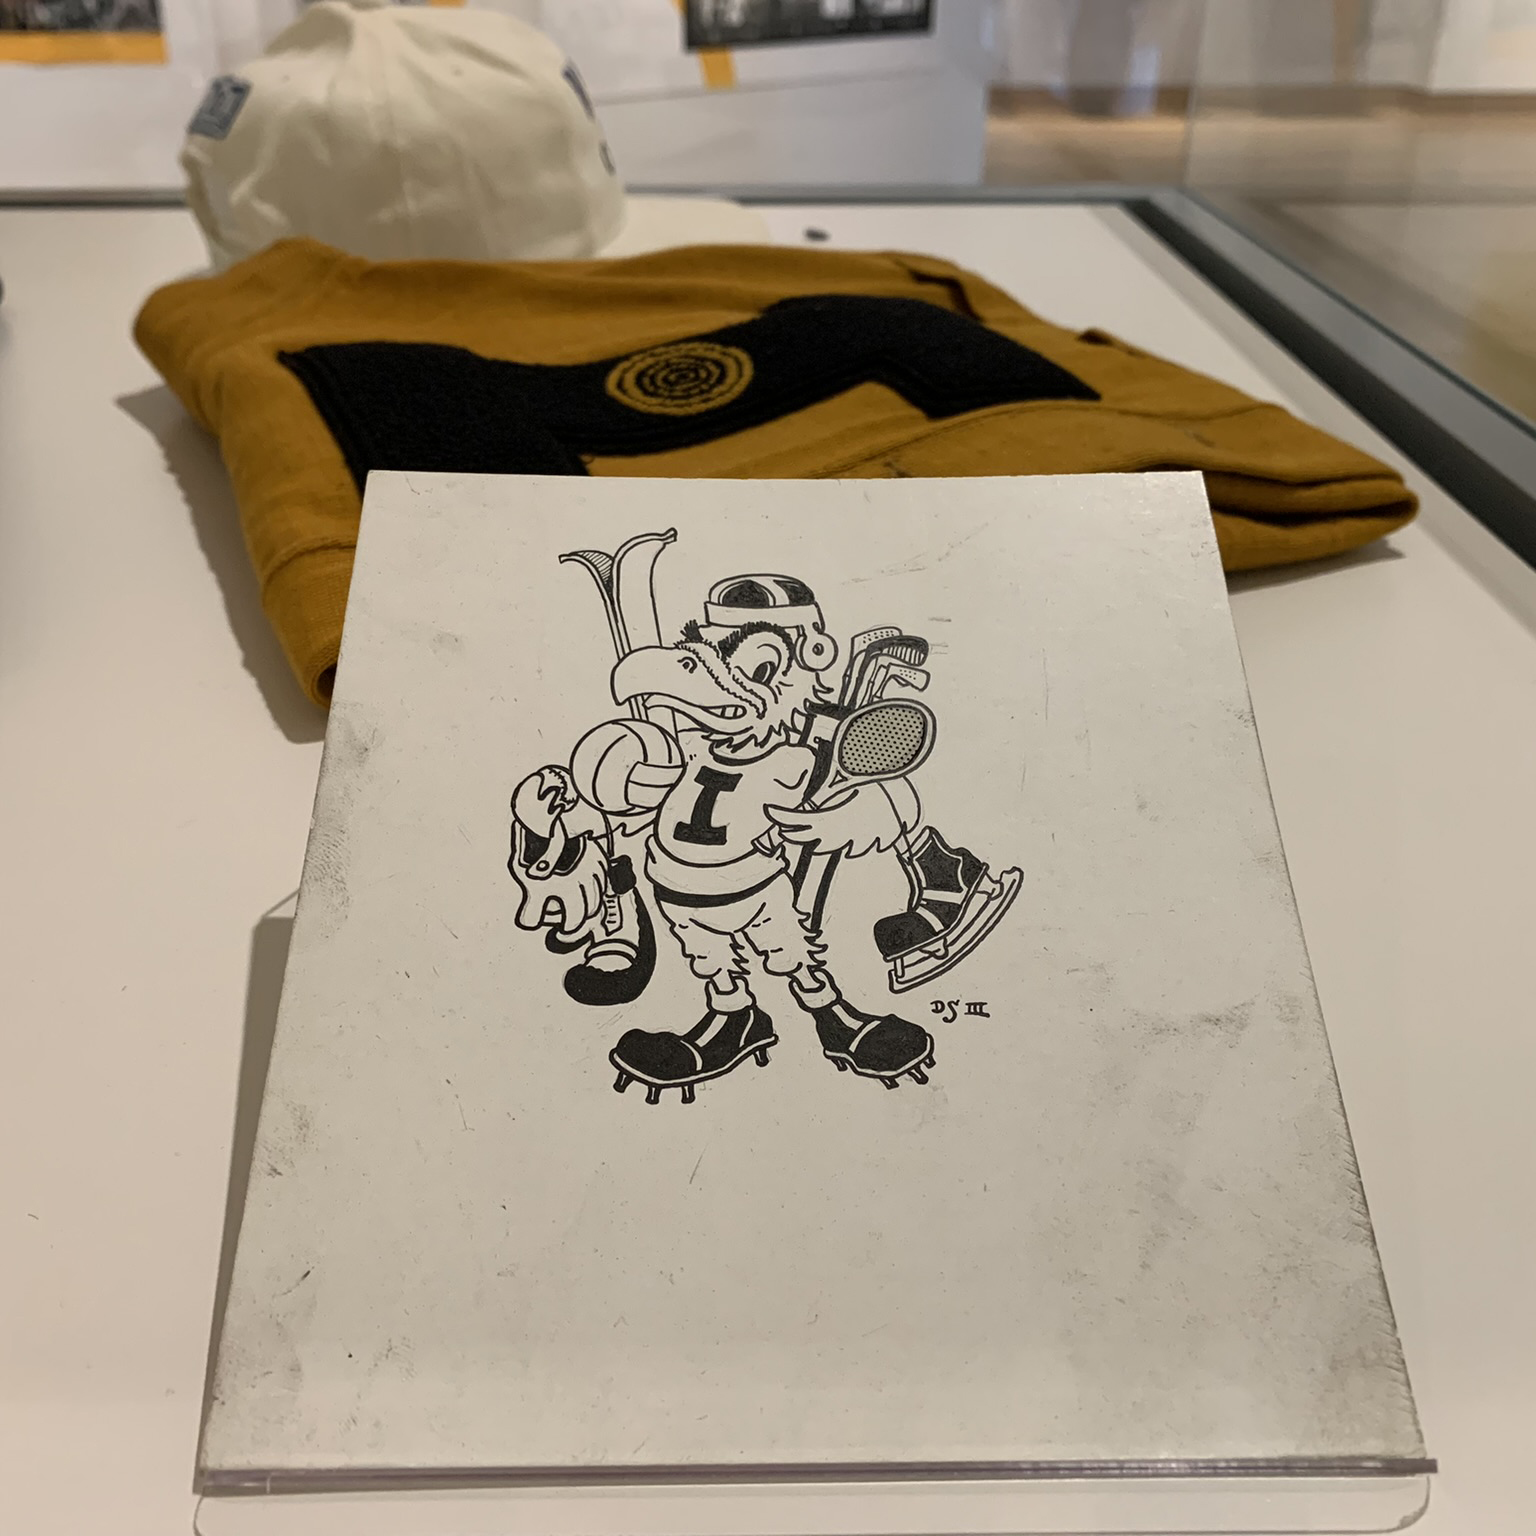 A sketch of Herky wearing football gear and holding sports equipment.